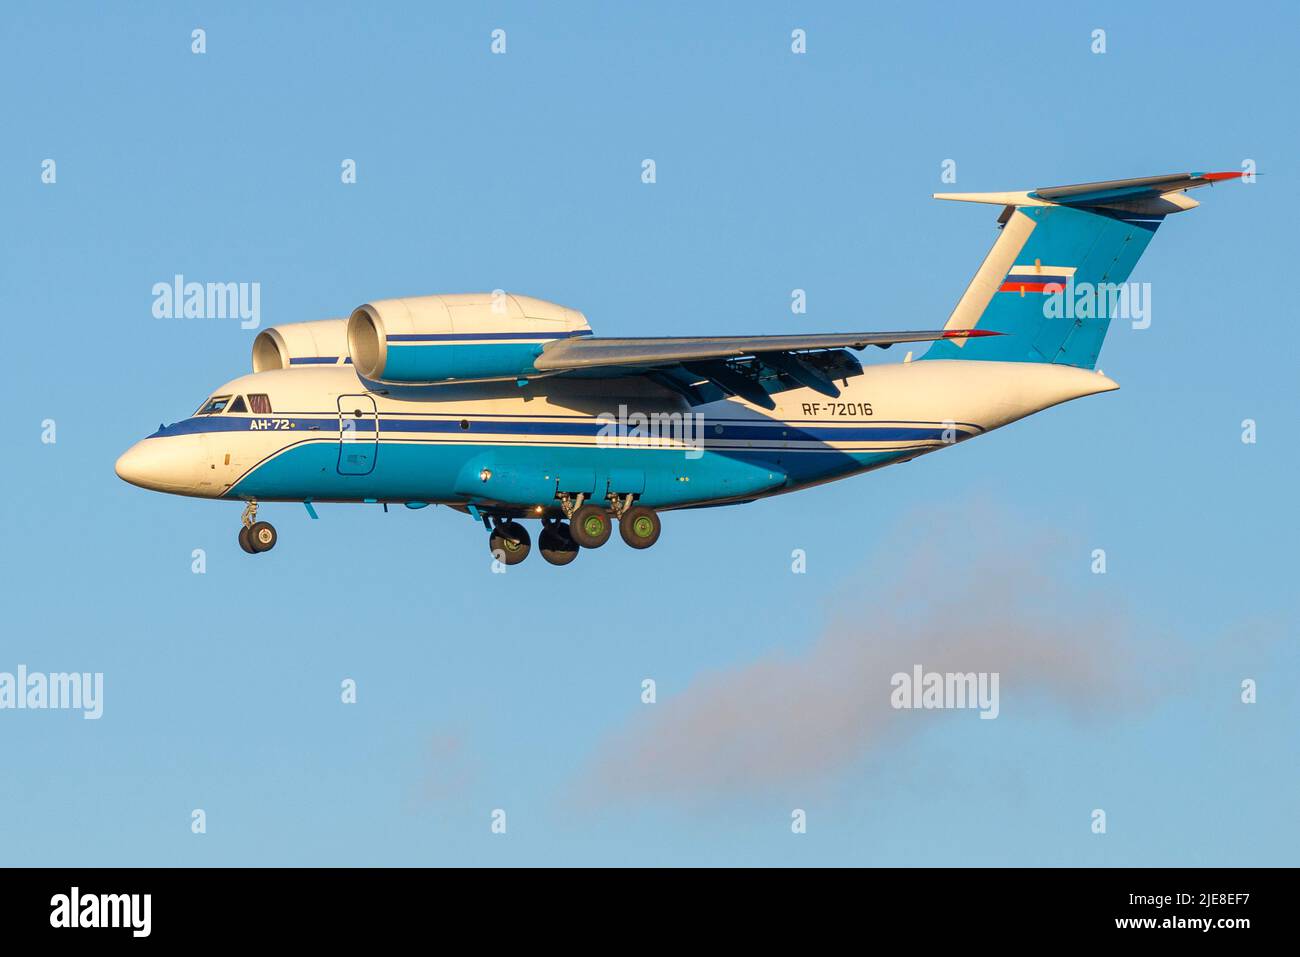 SAINT PETERSBURG, RUSSIA - OCTOBER 25, 2018: Plane An-72 (RF-72016) of the federal border service of Russia in flight Stock Photo